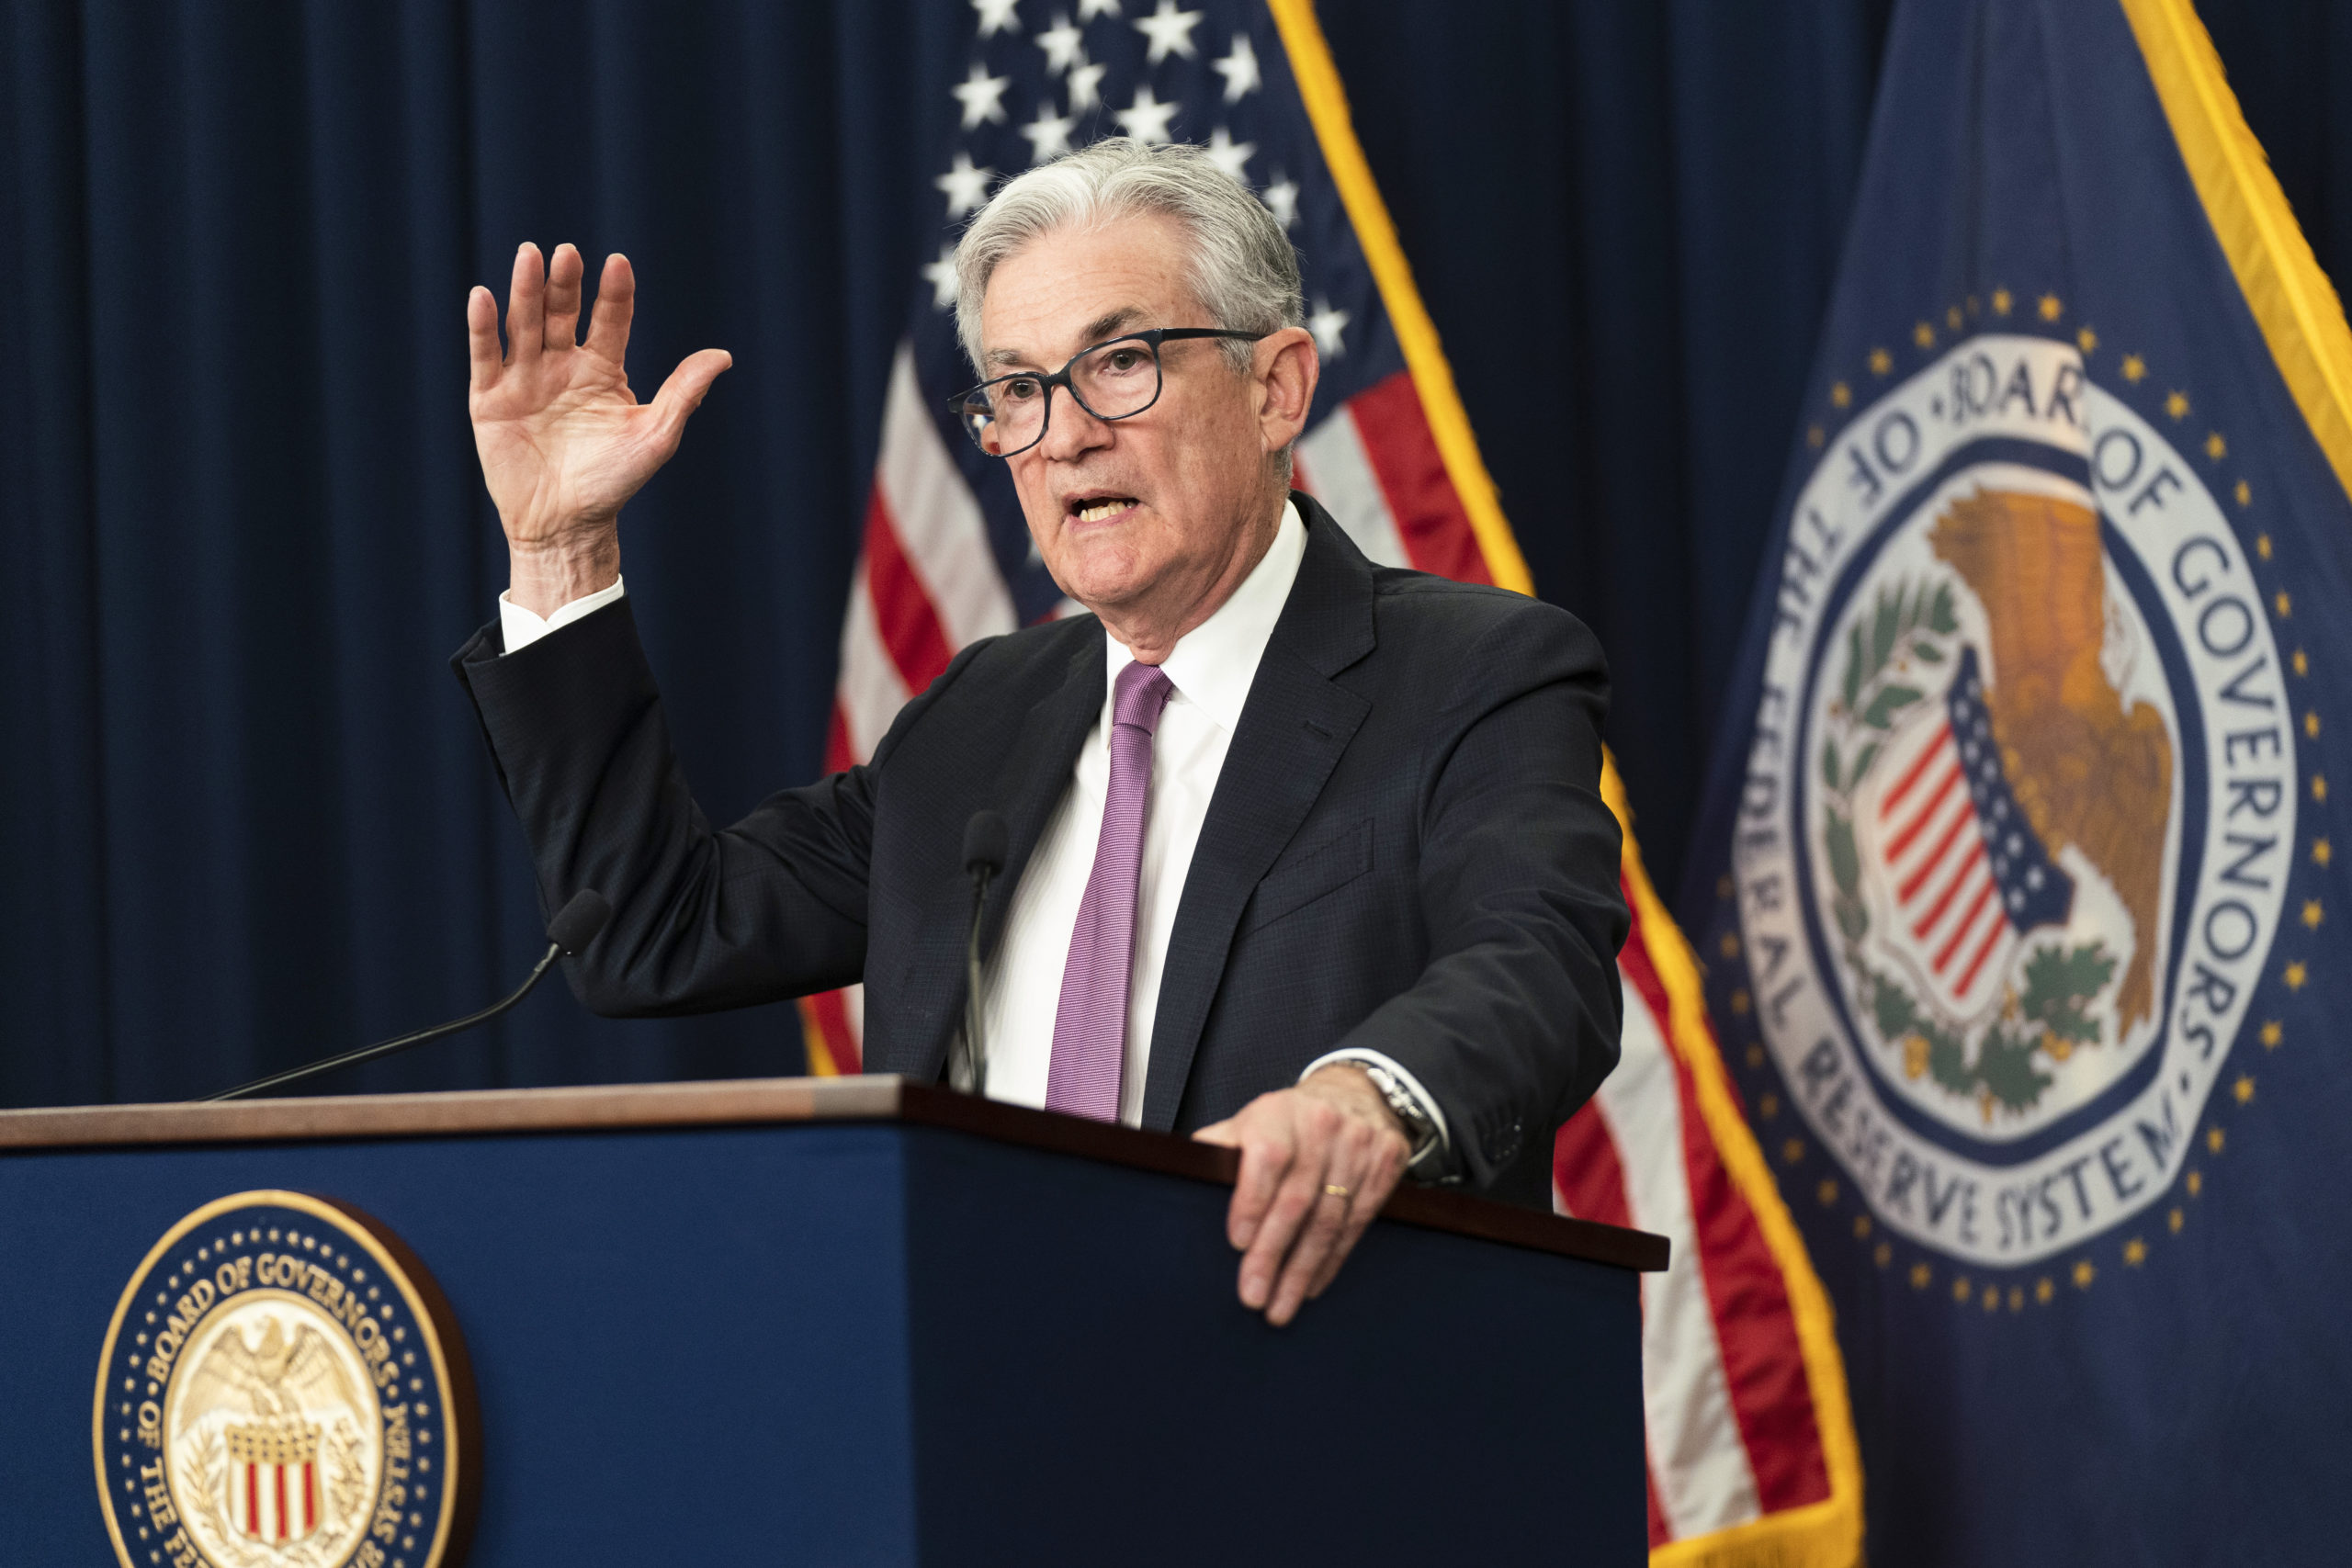 Federal Reserve Chairman Jerome Powell speaks during a news conference at the Federal Reserve Board building in Washington July 27.